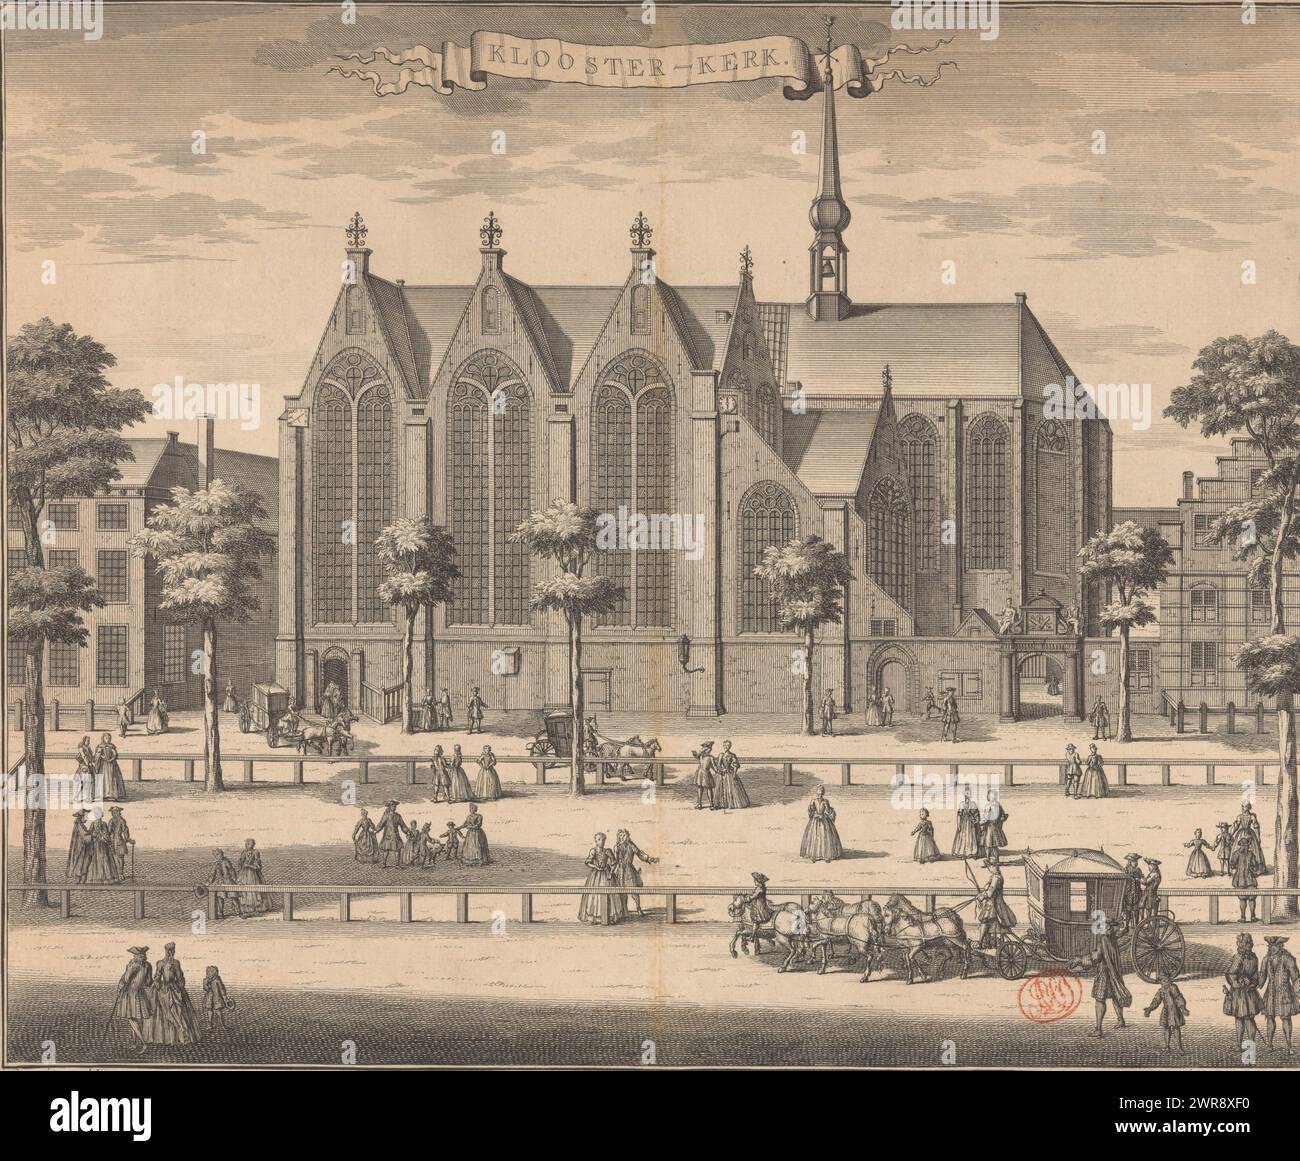 View of the Kloosterkerk in The Hague, Klooster-kerk (title on object), View of the Kloosterkerk on the Lange Voorhout in The Hague. Various figures and carriages in front of the church., print maker: anonymous, after drawing by: Gerrit van Giessen, publisher: Reinier Boitet, after drawing by: The Hague, publisher: Delft, publisher: Amsterdam, 1730 - 1736, paper, engraving, etching, height 285 mm × width 344 mm, print Stock Photo